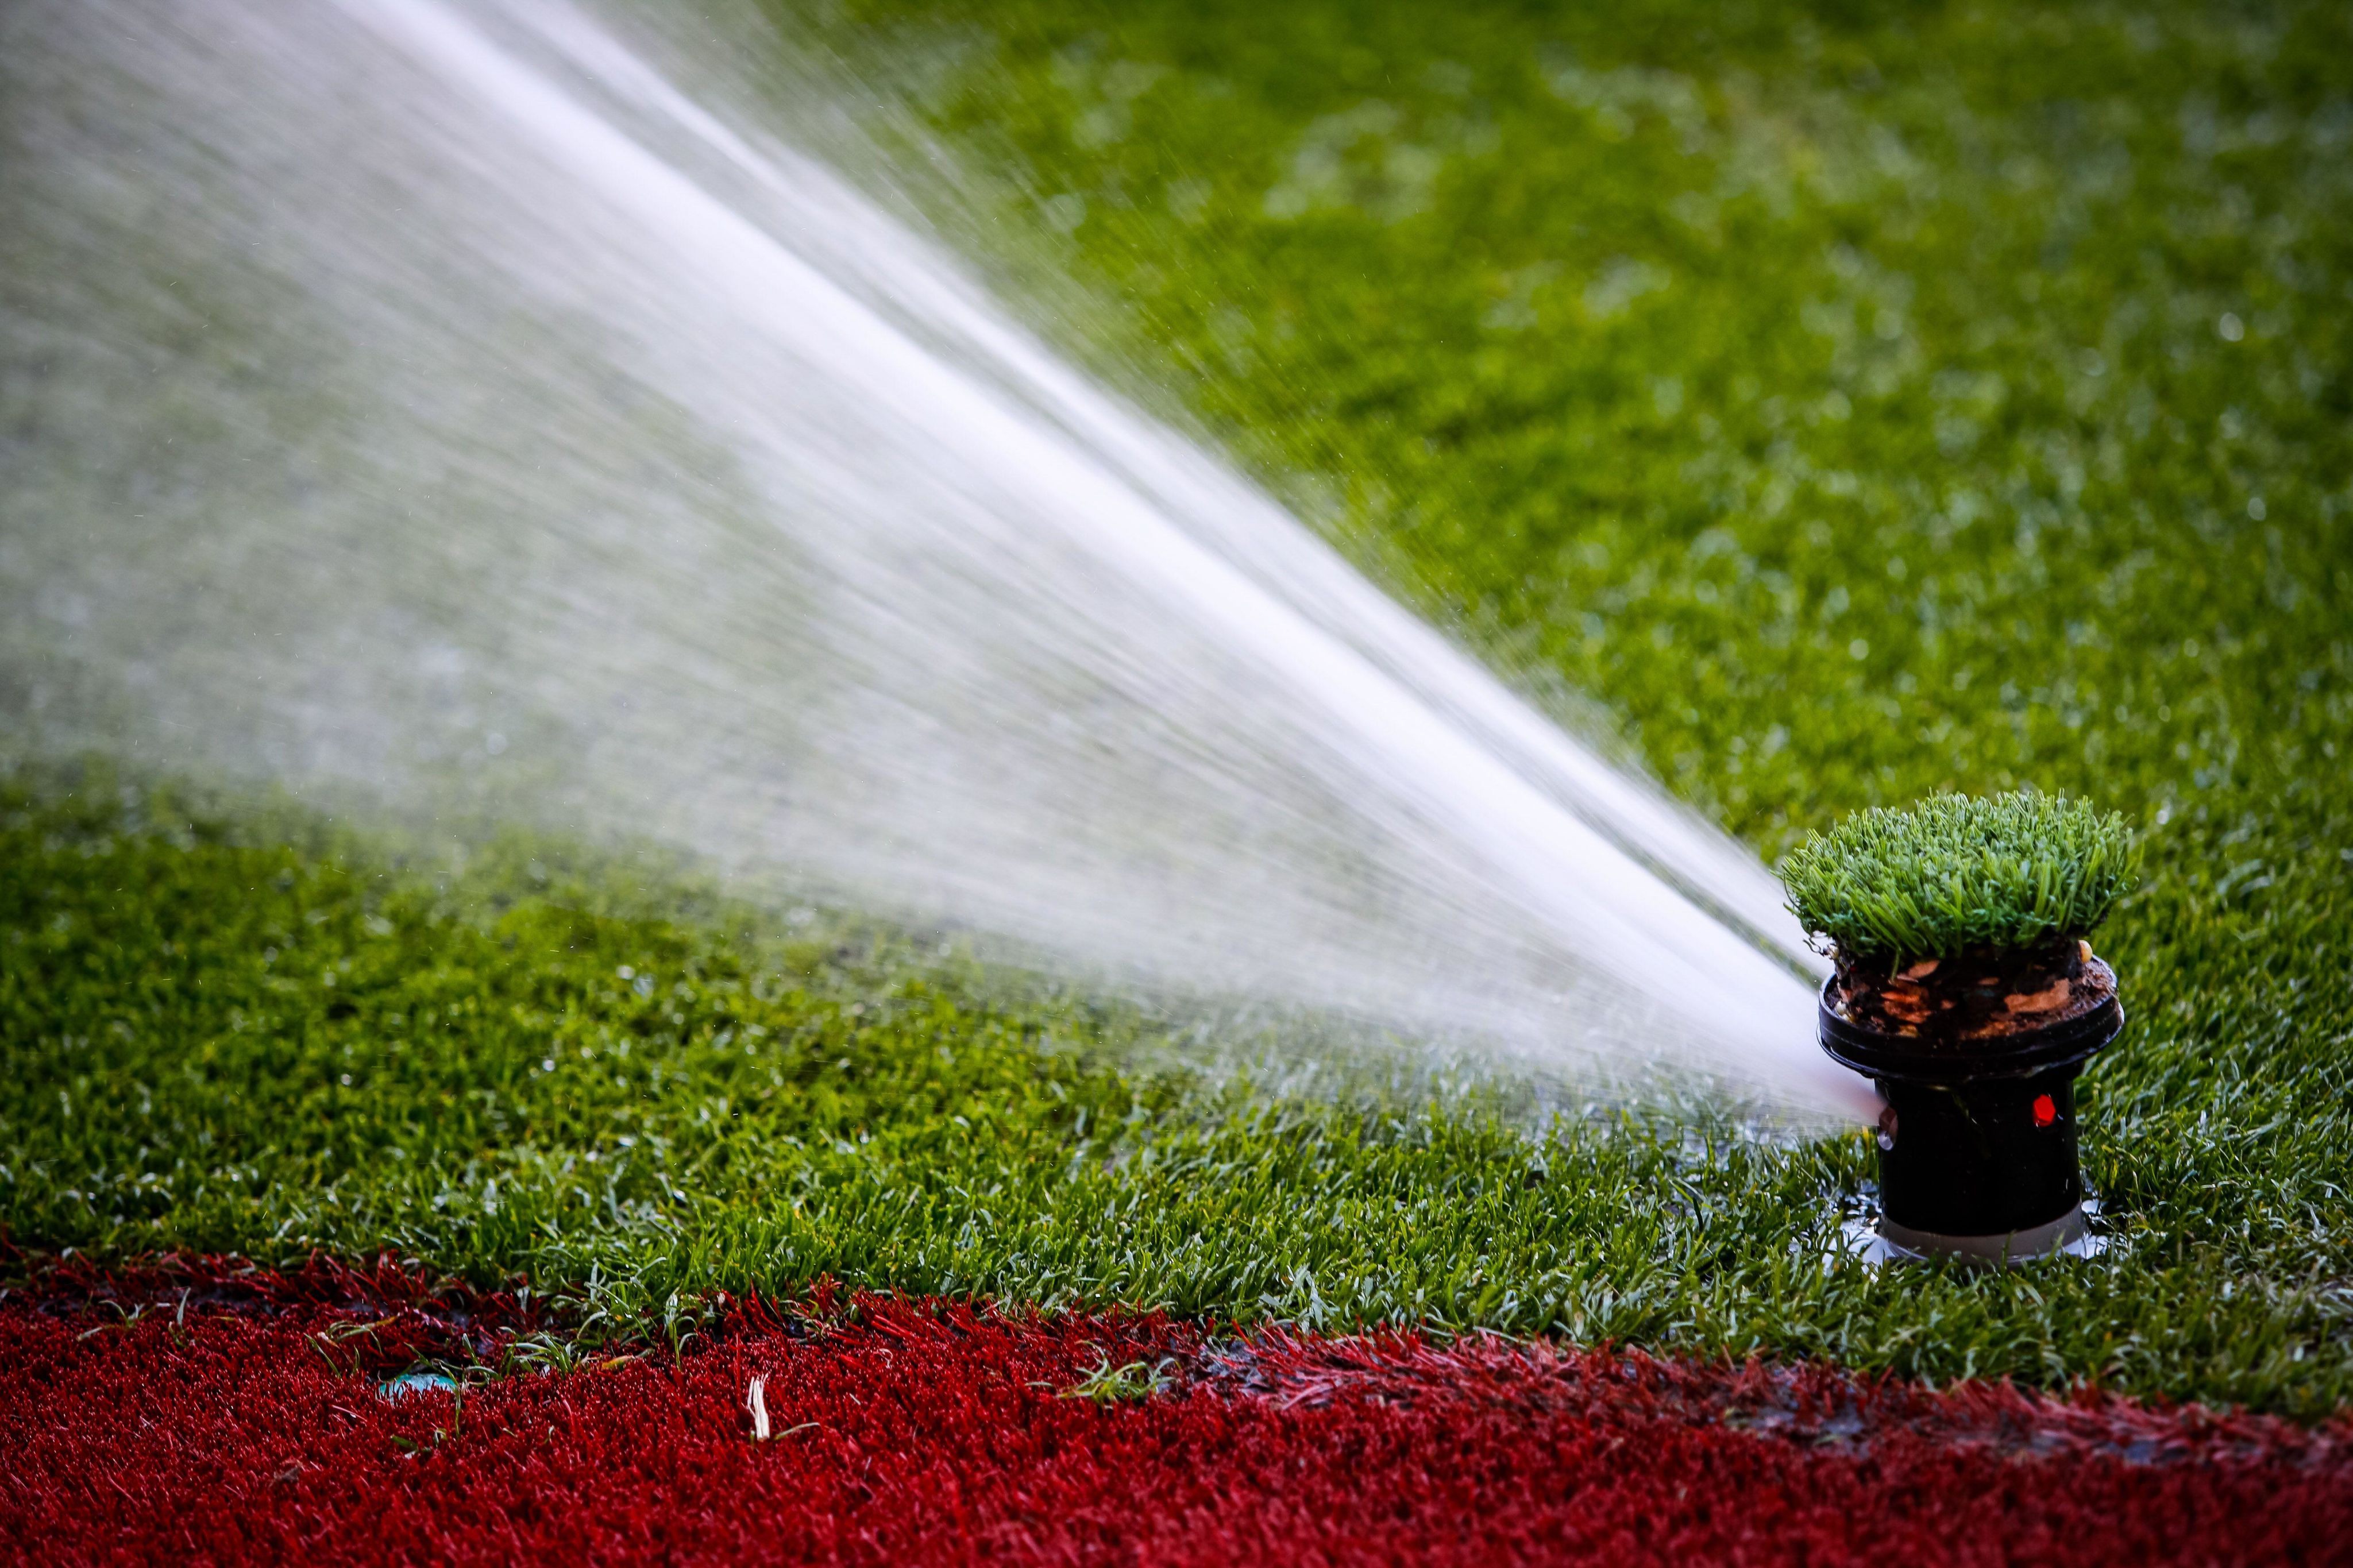 A sprinkler waters a soccer pitch